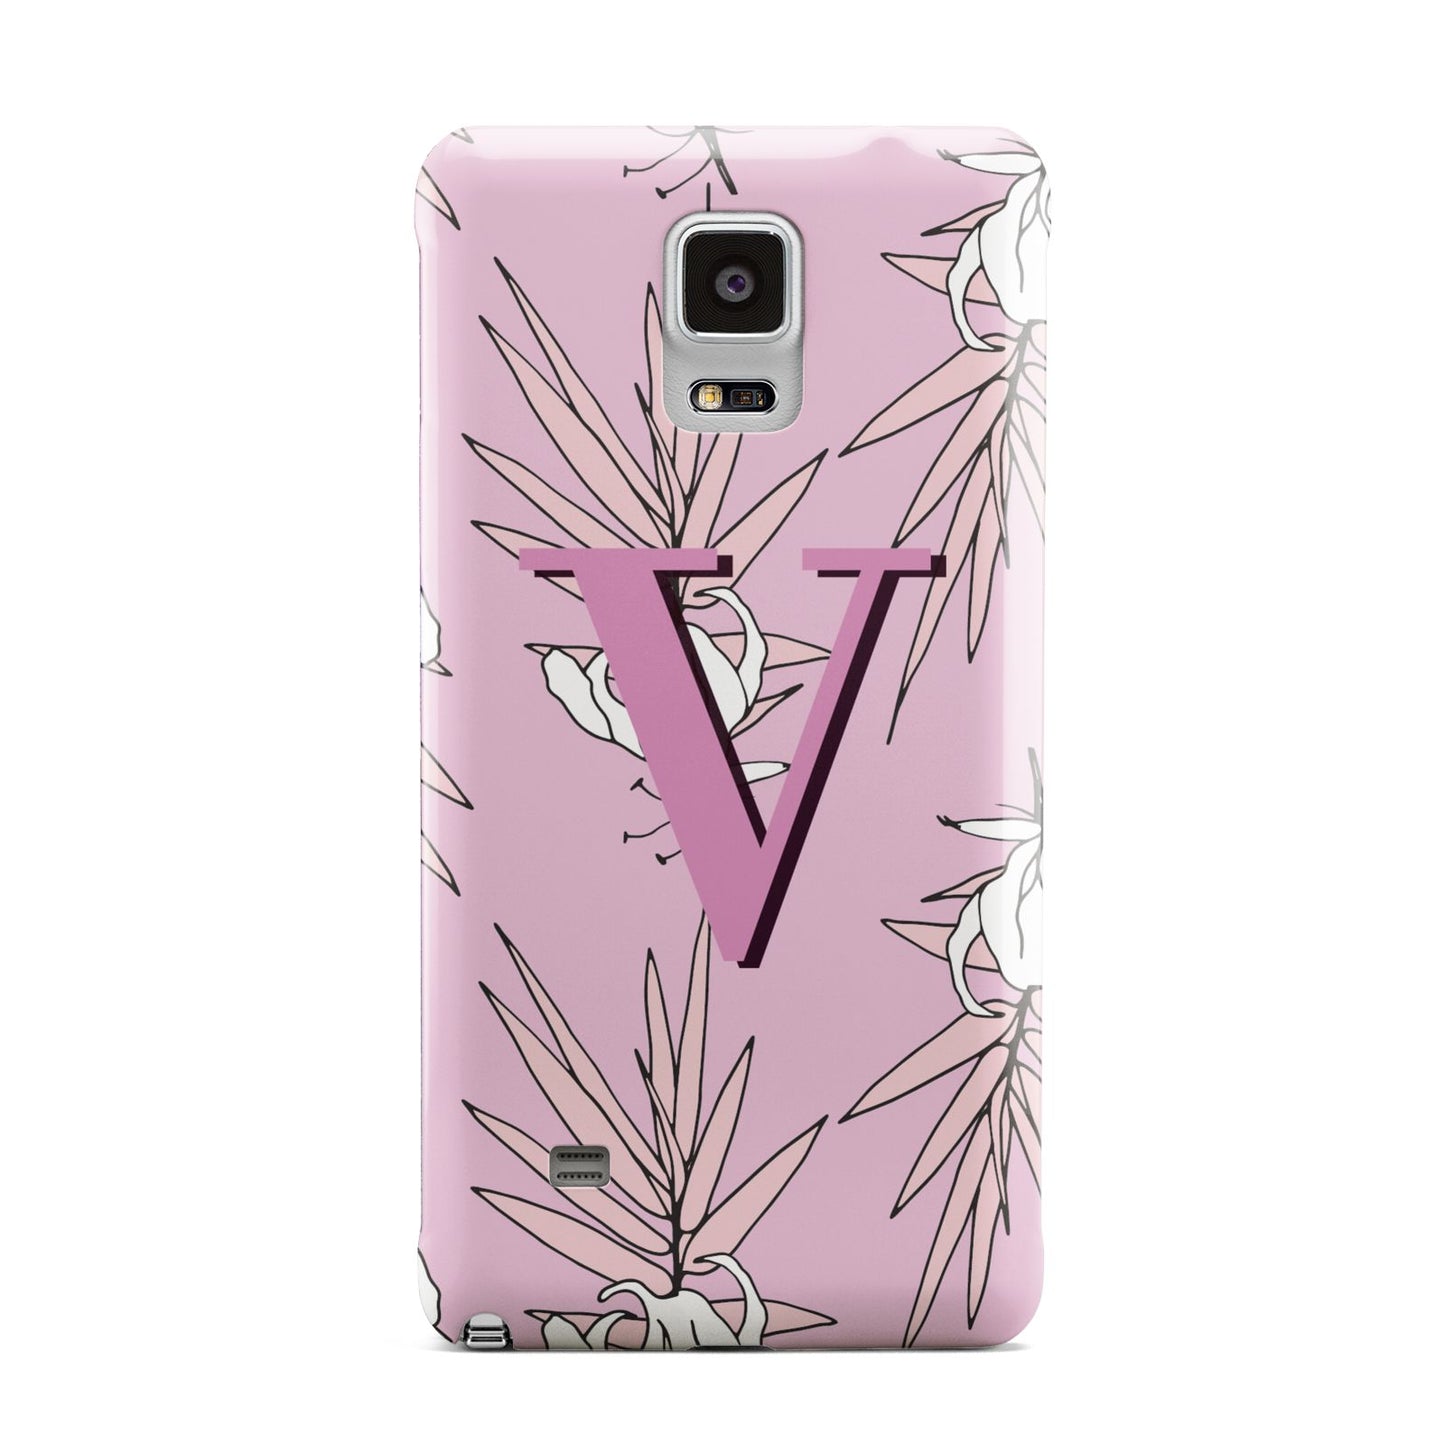 Personalised Pink and White Floral Monogram Samsung Galaxy Note 4 Case